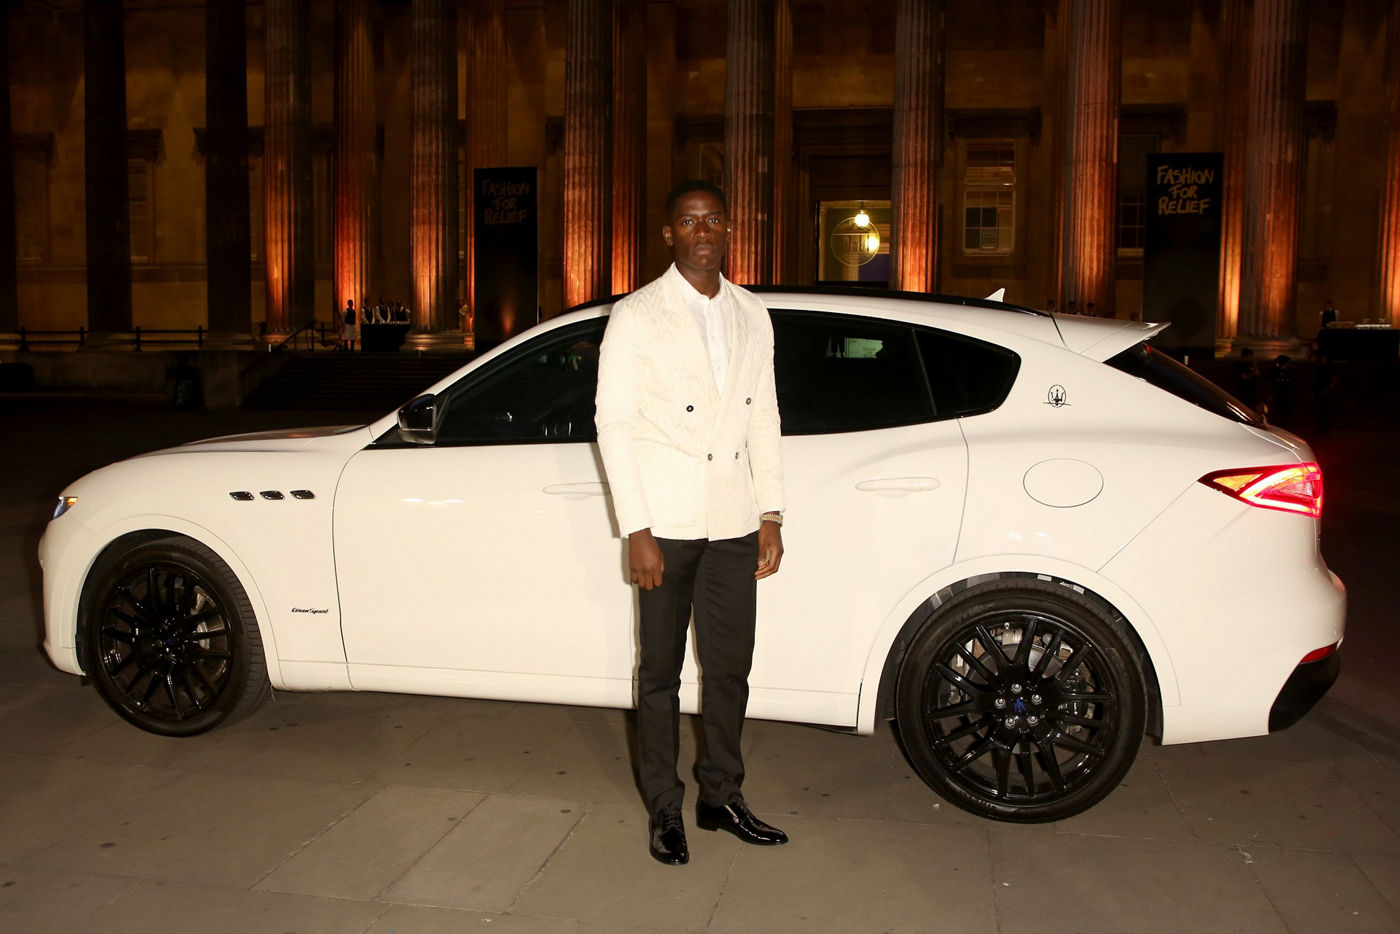 Maserati-chauffeur-s-Damson-Idris-to-Fashion-For-Relief-at-The-British-Museum-on-September-14,-2019-in-London,-England-min